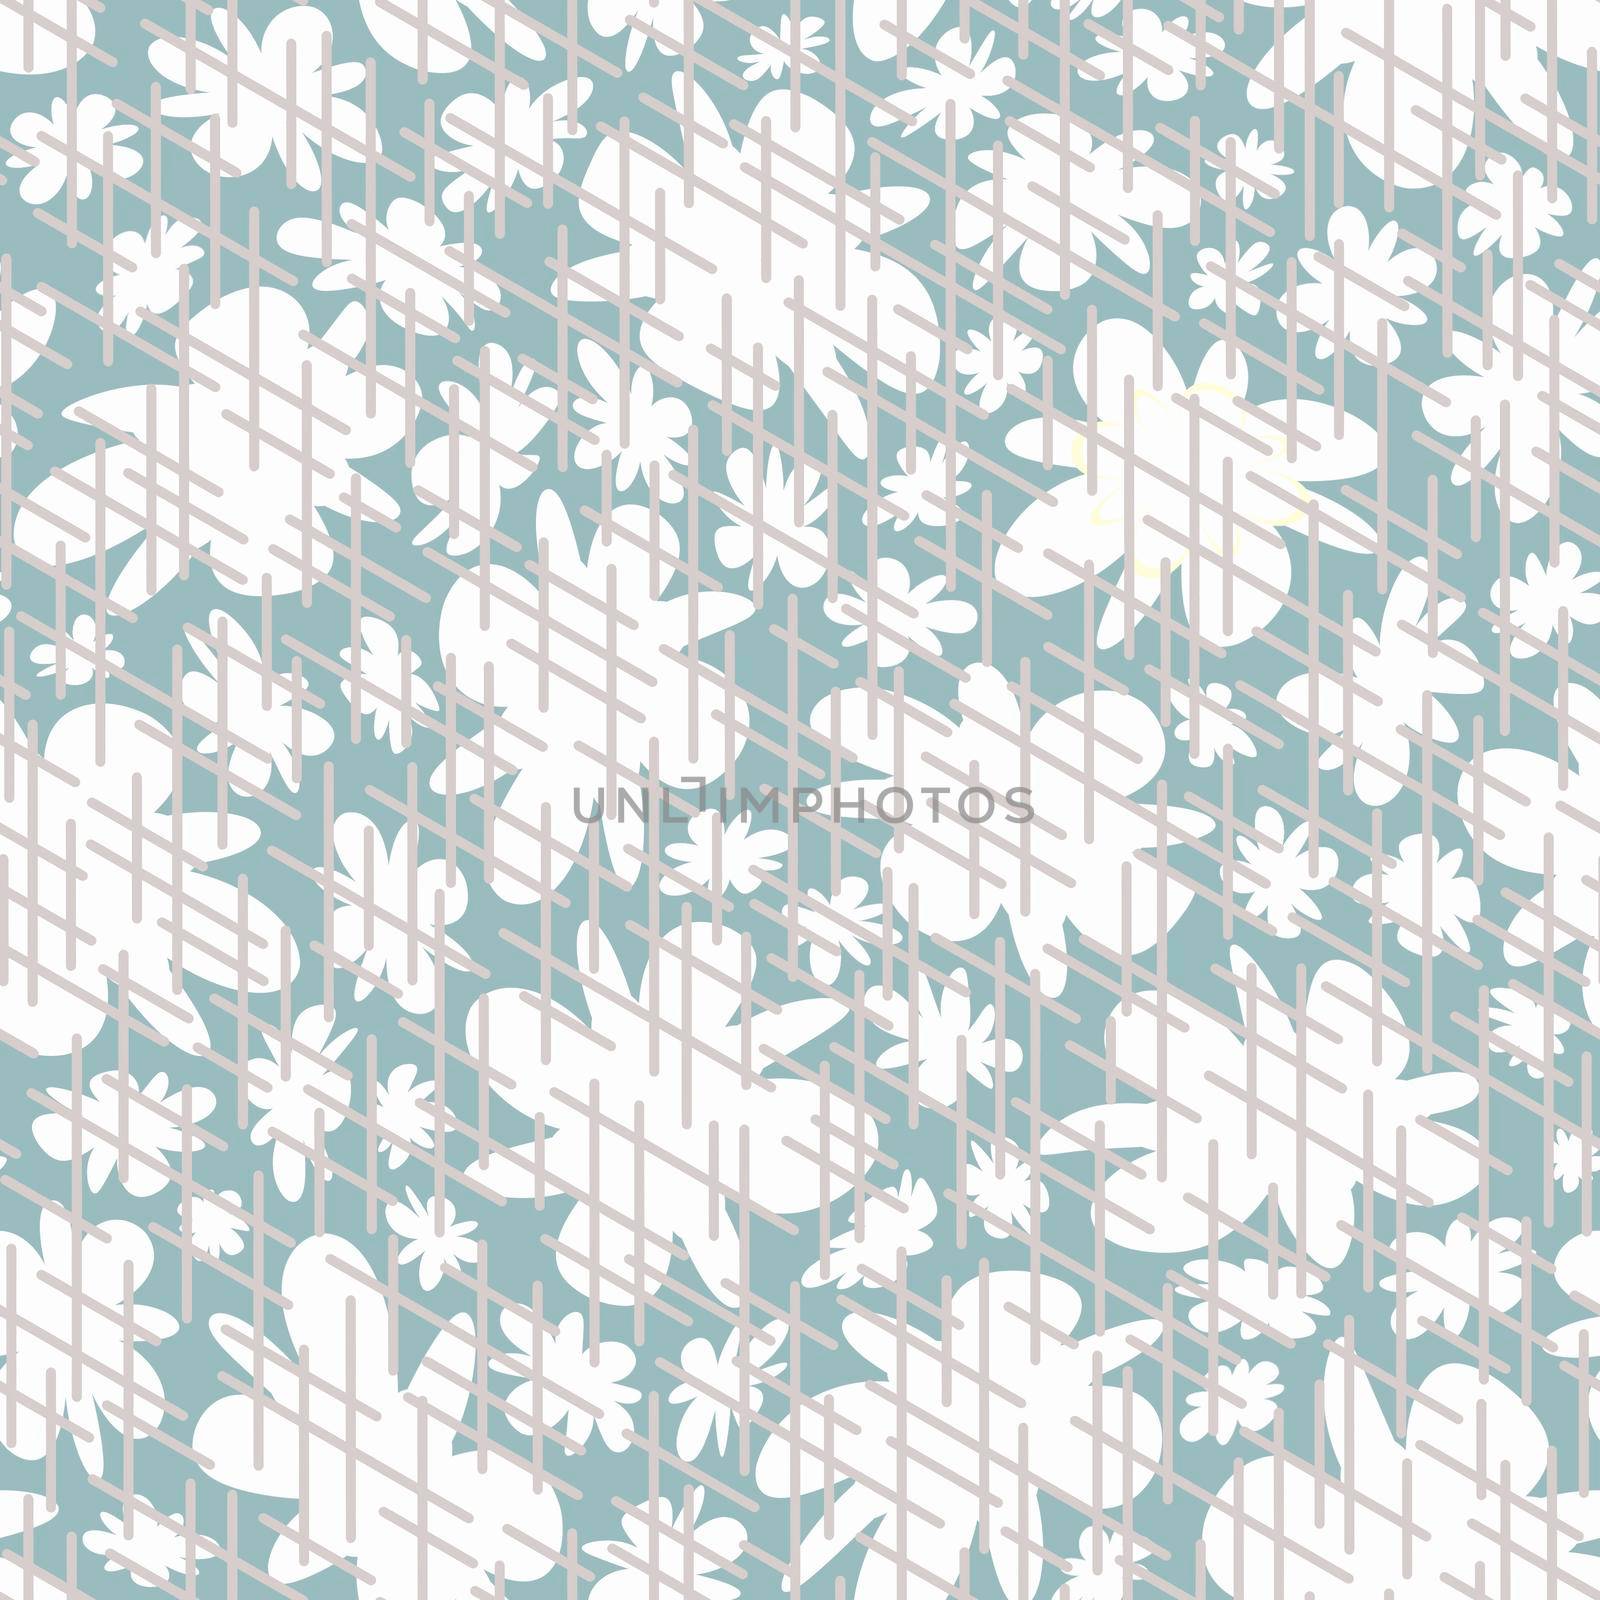 Trendy fabric pattern with miniature flowers and lines.Summer print.Fashion design.Motifs scattered random.Elegant template prints.White lilac azure.Good for fashion,textile,fabric,gift wrapping paper